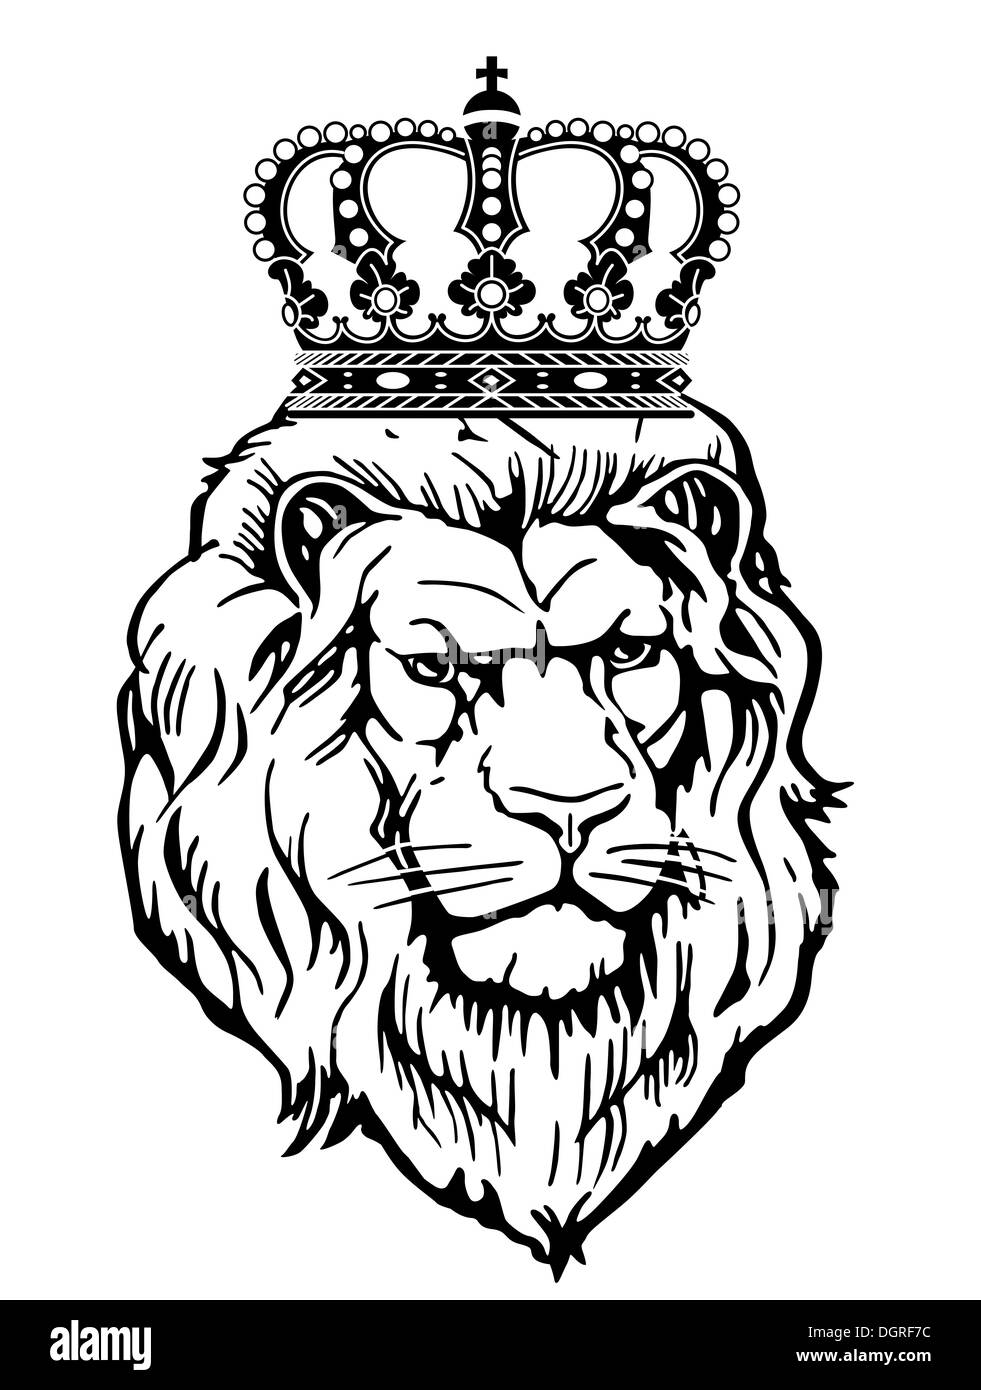 Lion with crown Stock Photo